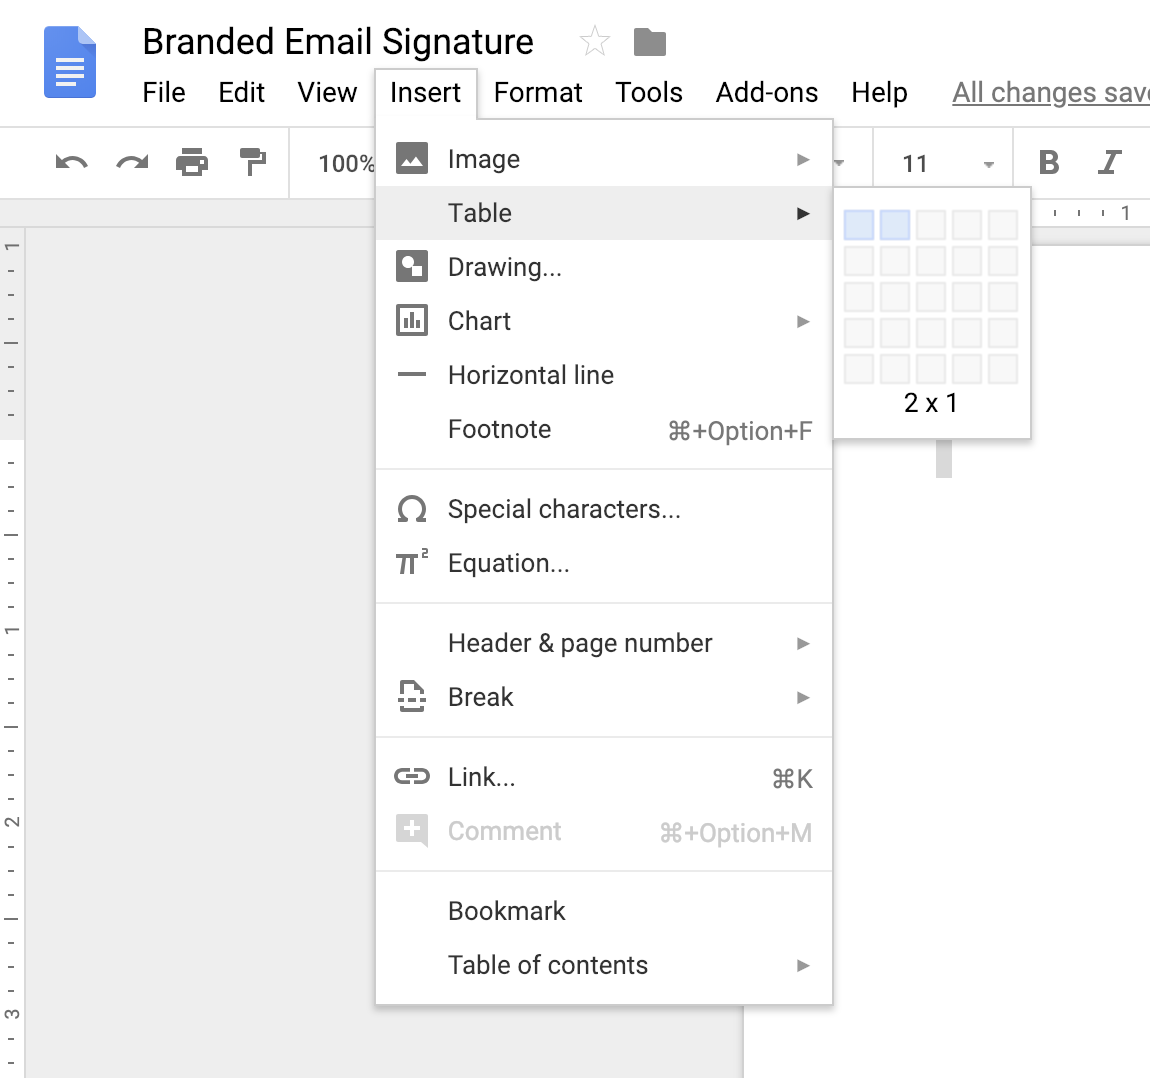 How to Create a Custom Email Signature for Your Brand - Sarah Ann Design